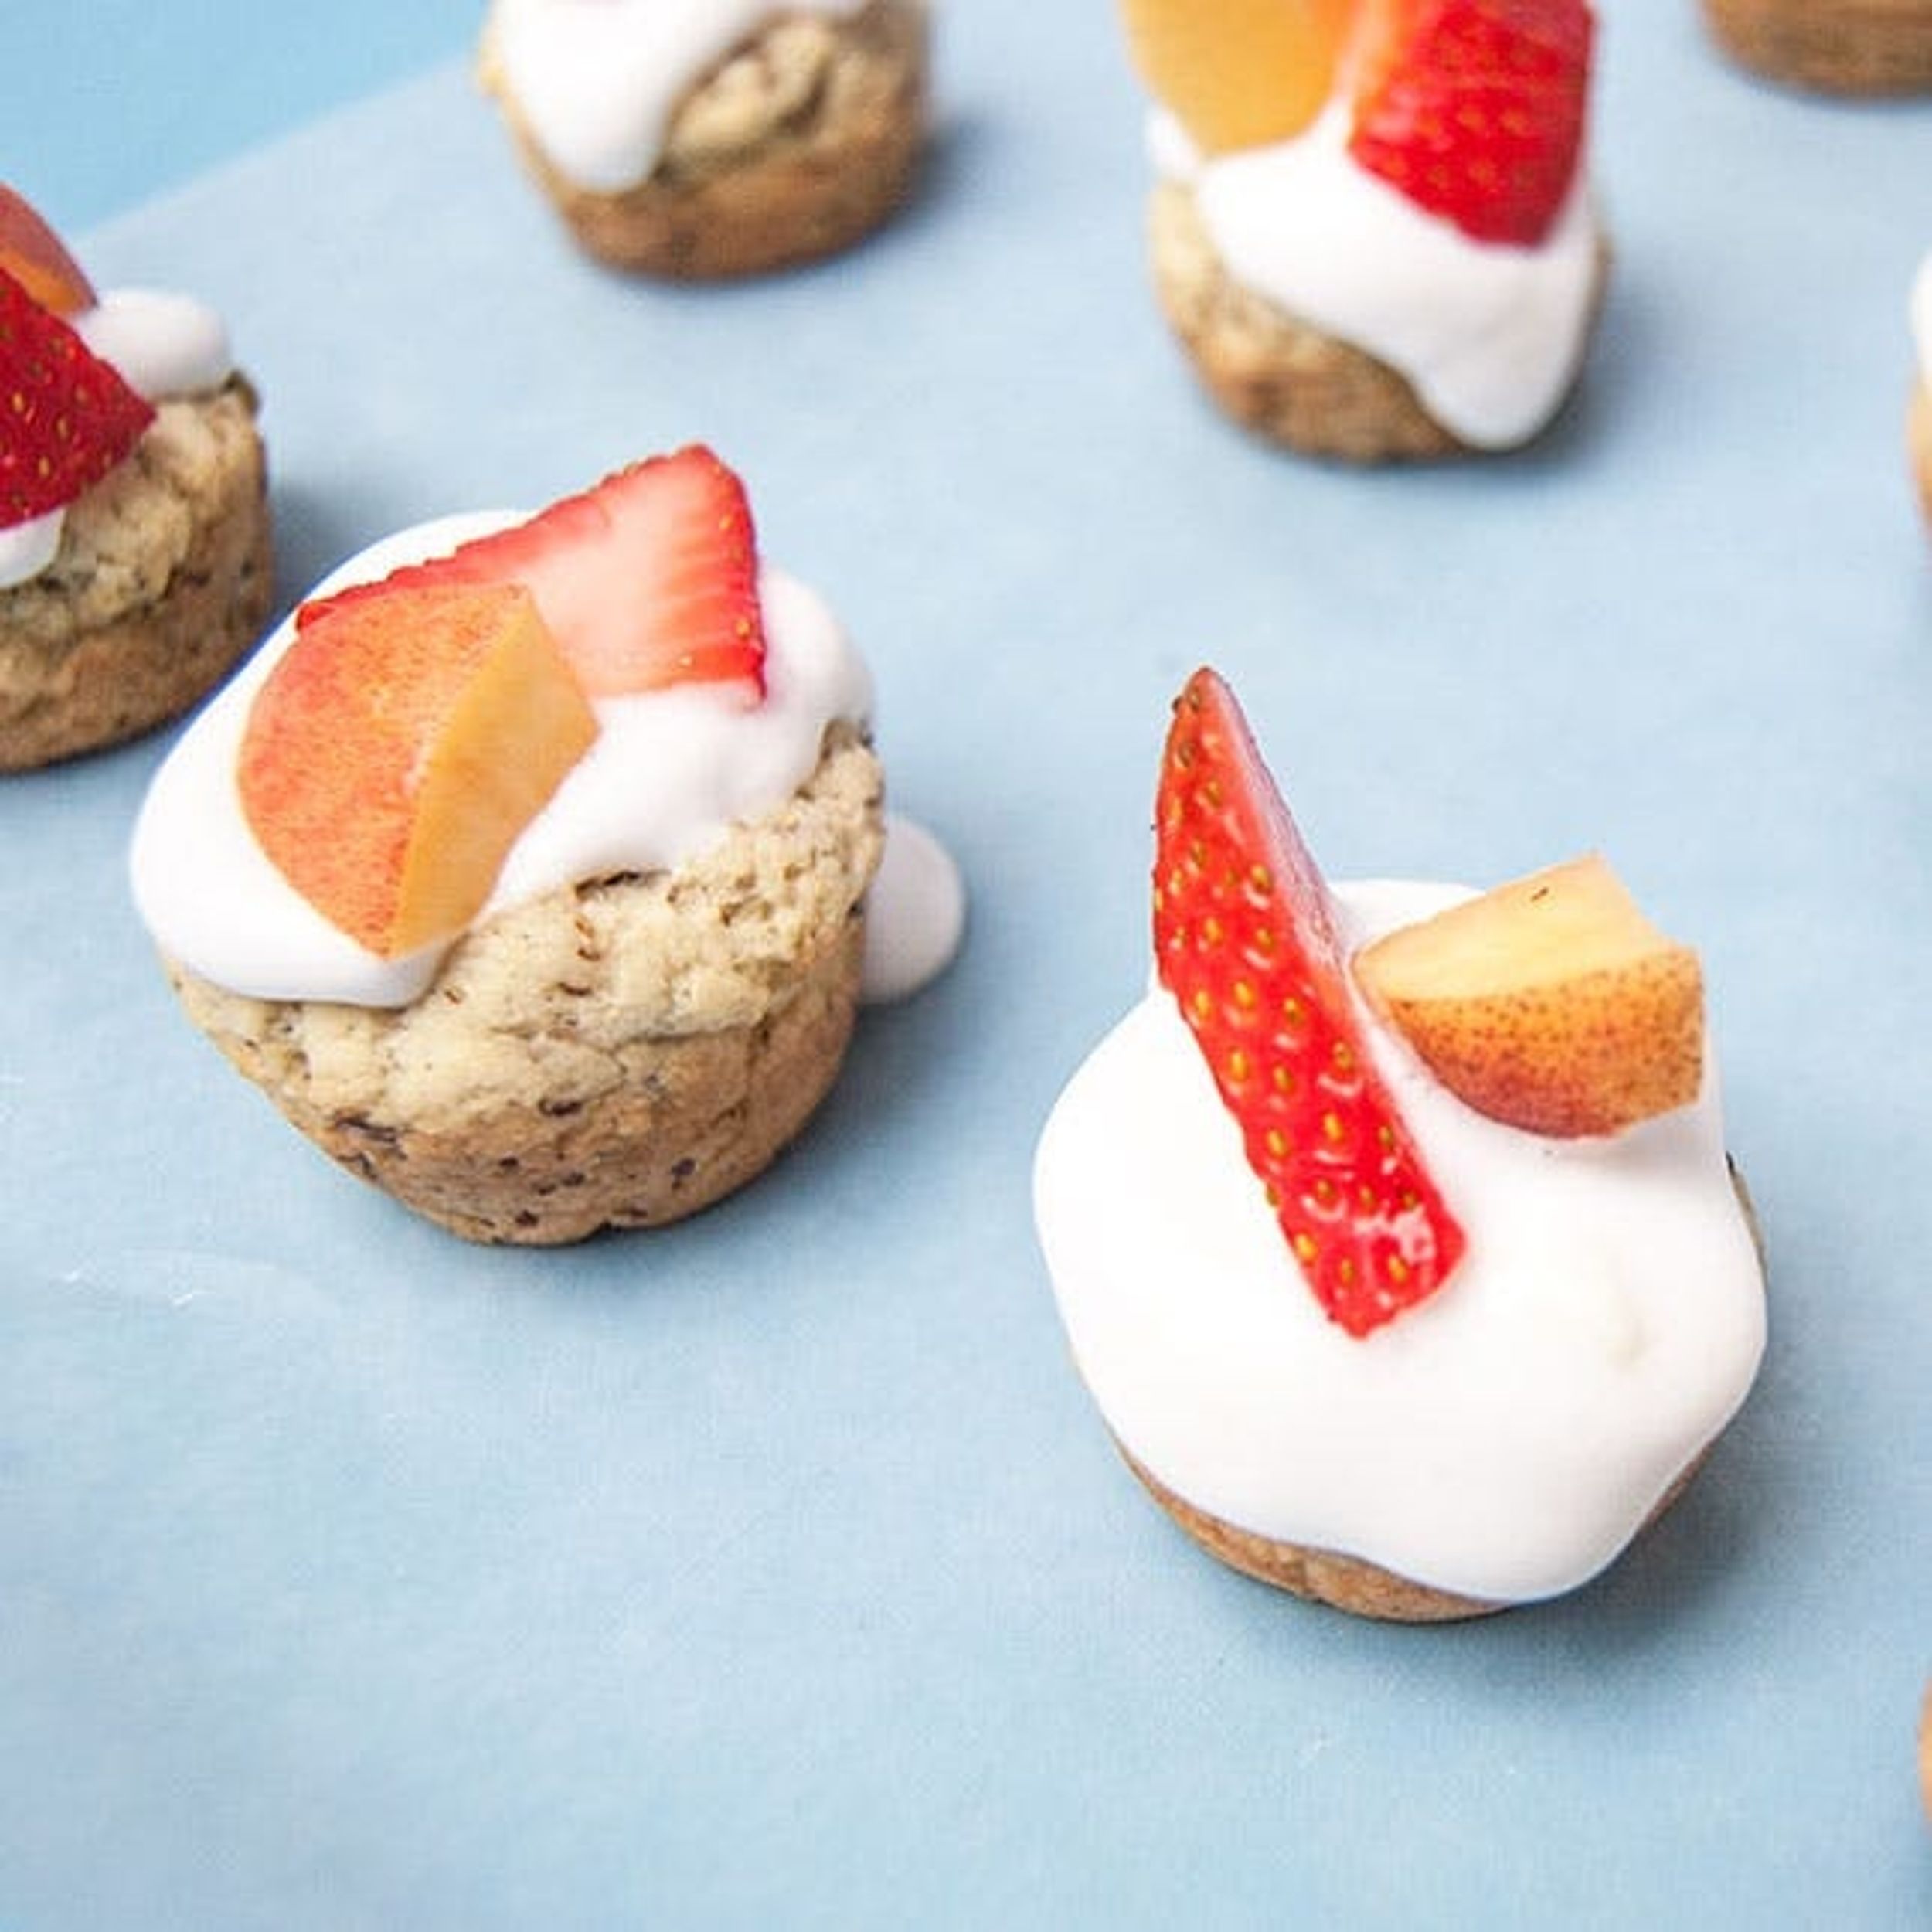 Make These Healthy(ish) Strawberry Peach Sugar Cookie Cups Recipe